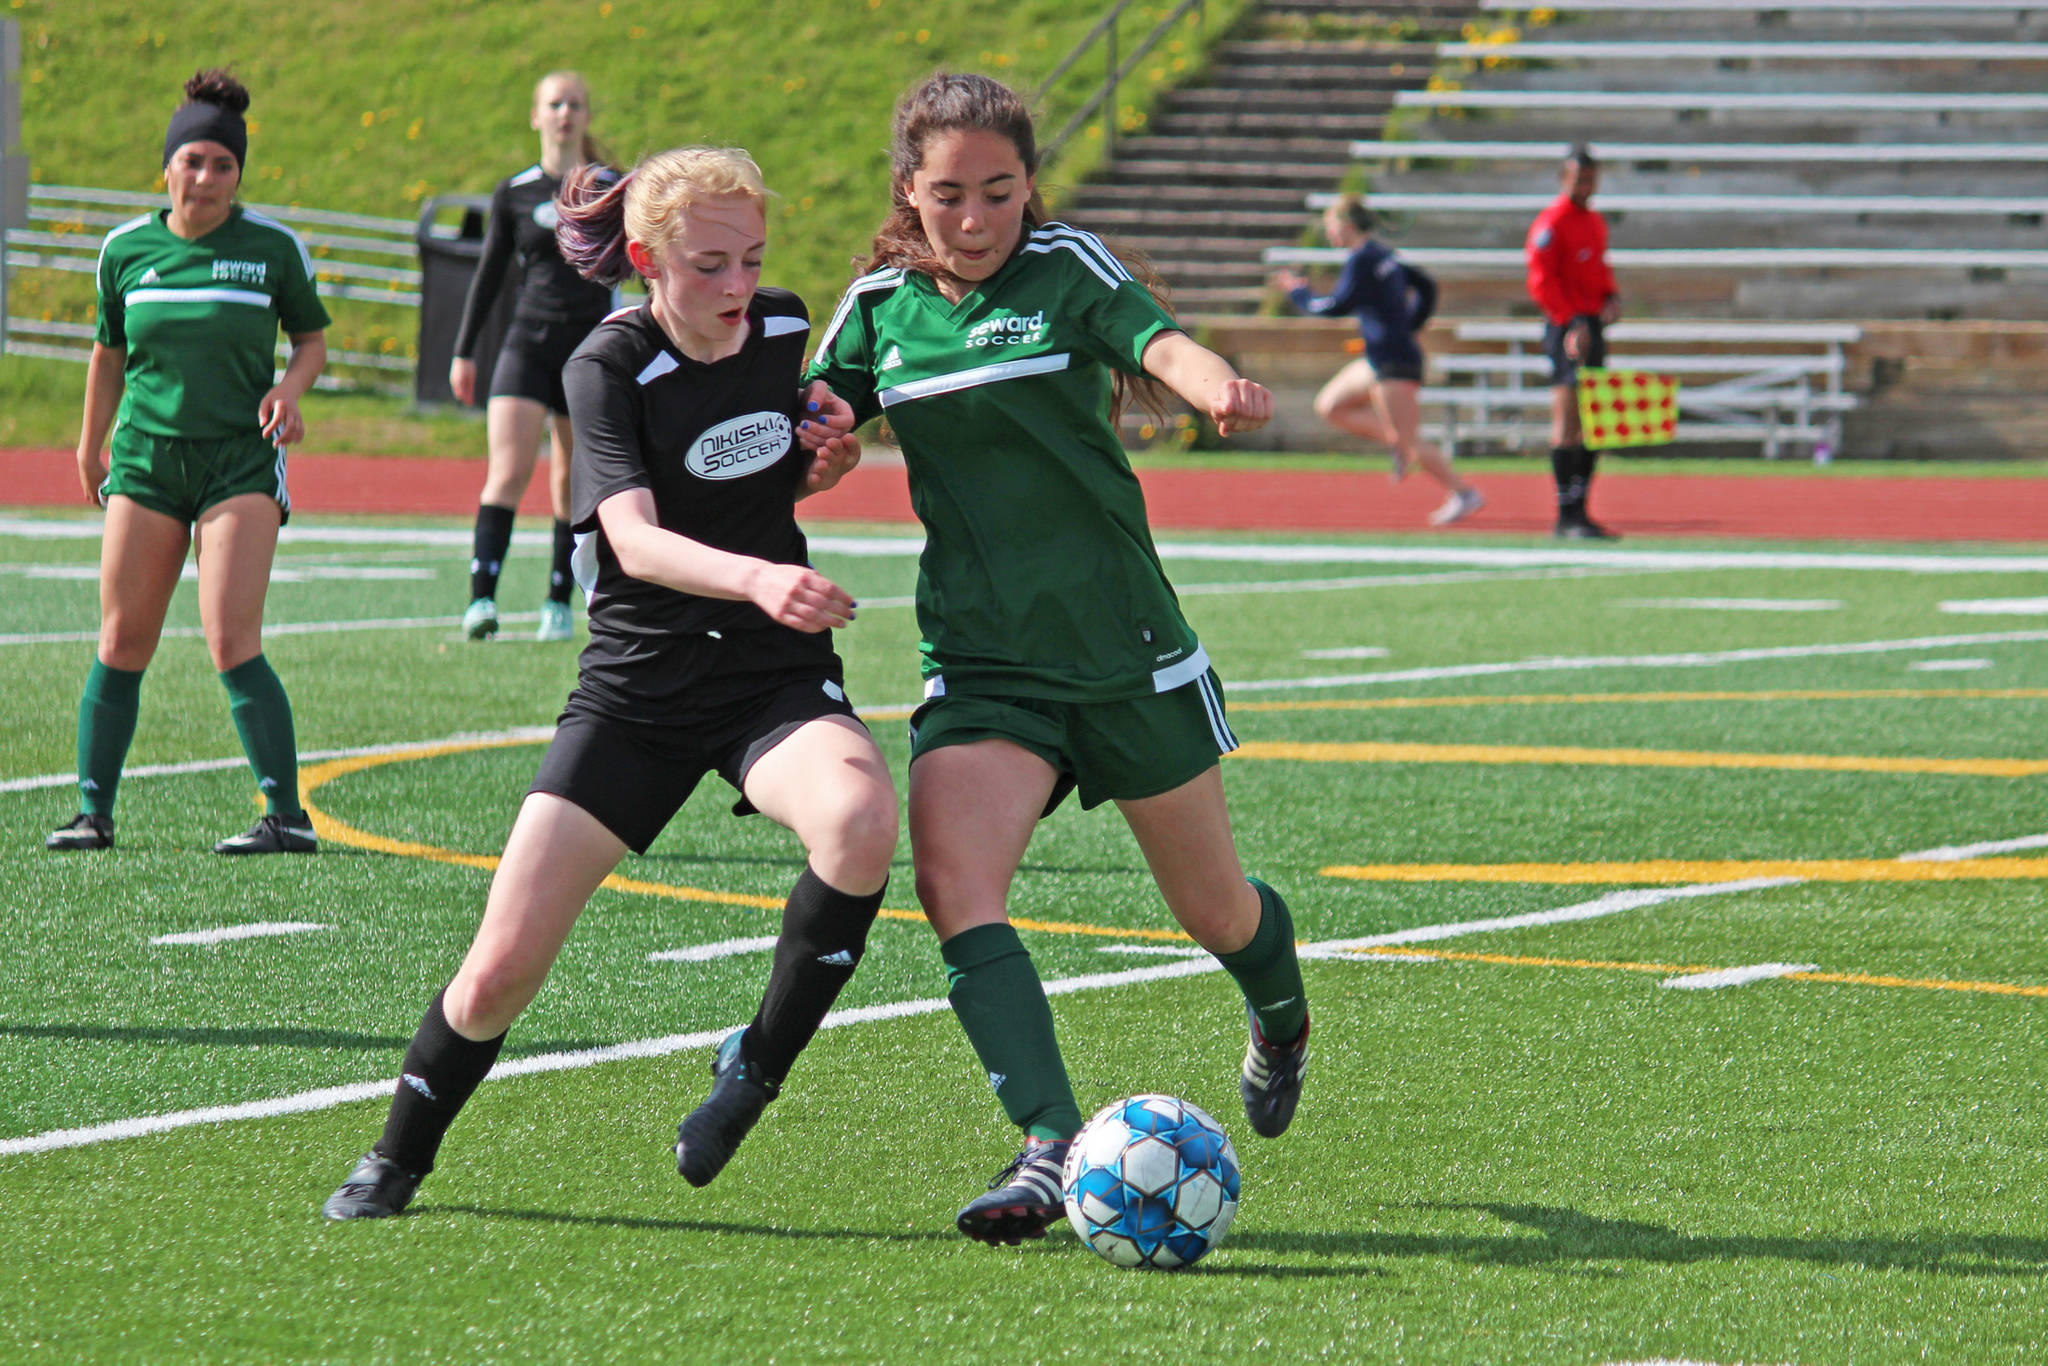 Nikiski’s Cailin Yeager (left) and Seward’s Belladonna Darby (right) battle for the ball during the first girls game of the Peninsula Conference Soccer Tournament on Thursday, May 16, 2019 at Homer High School in Homer, Alaska. (Photo by Megan Pacer/Homer News)